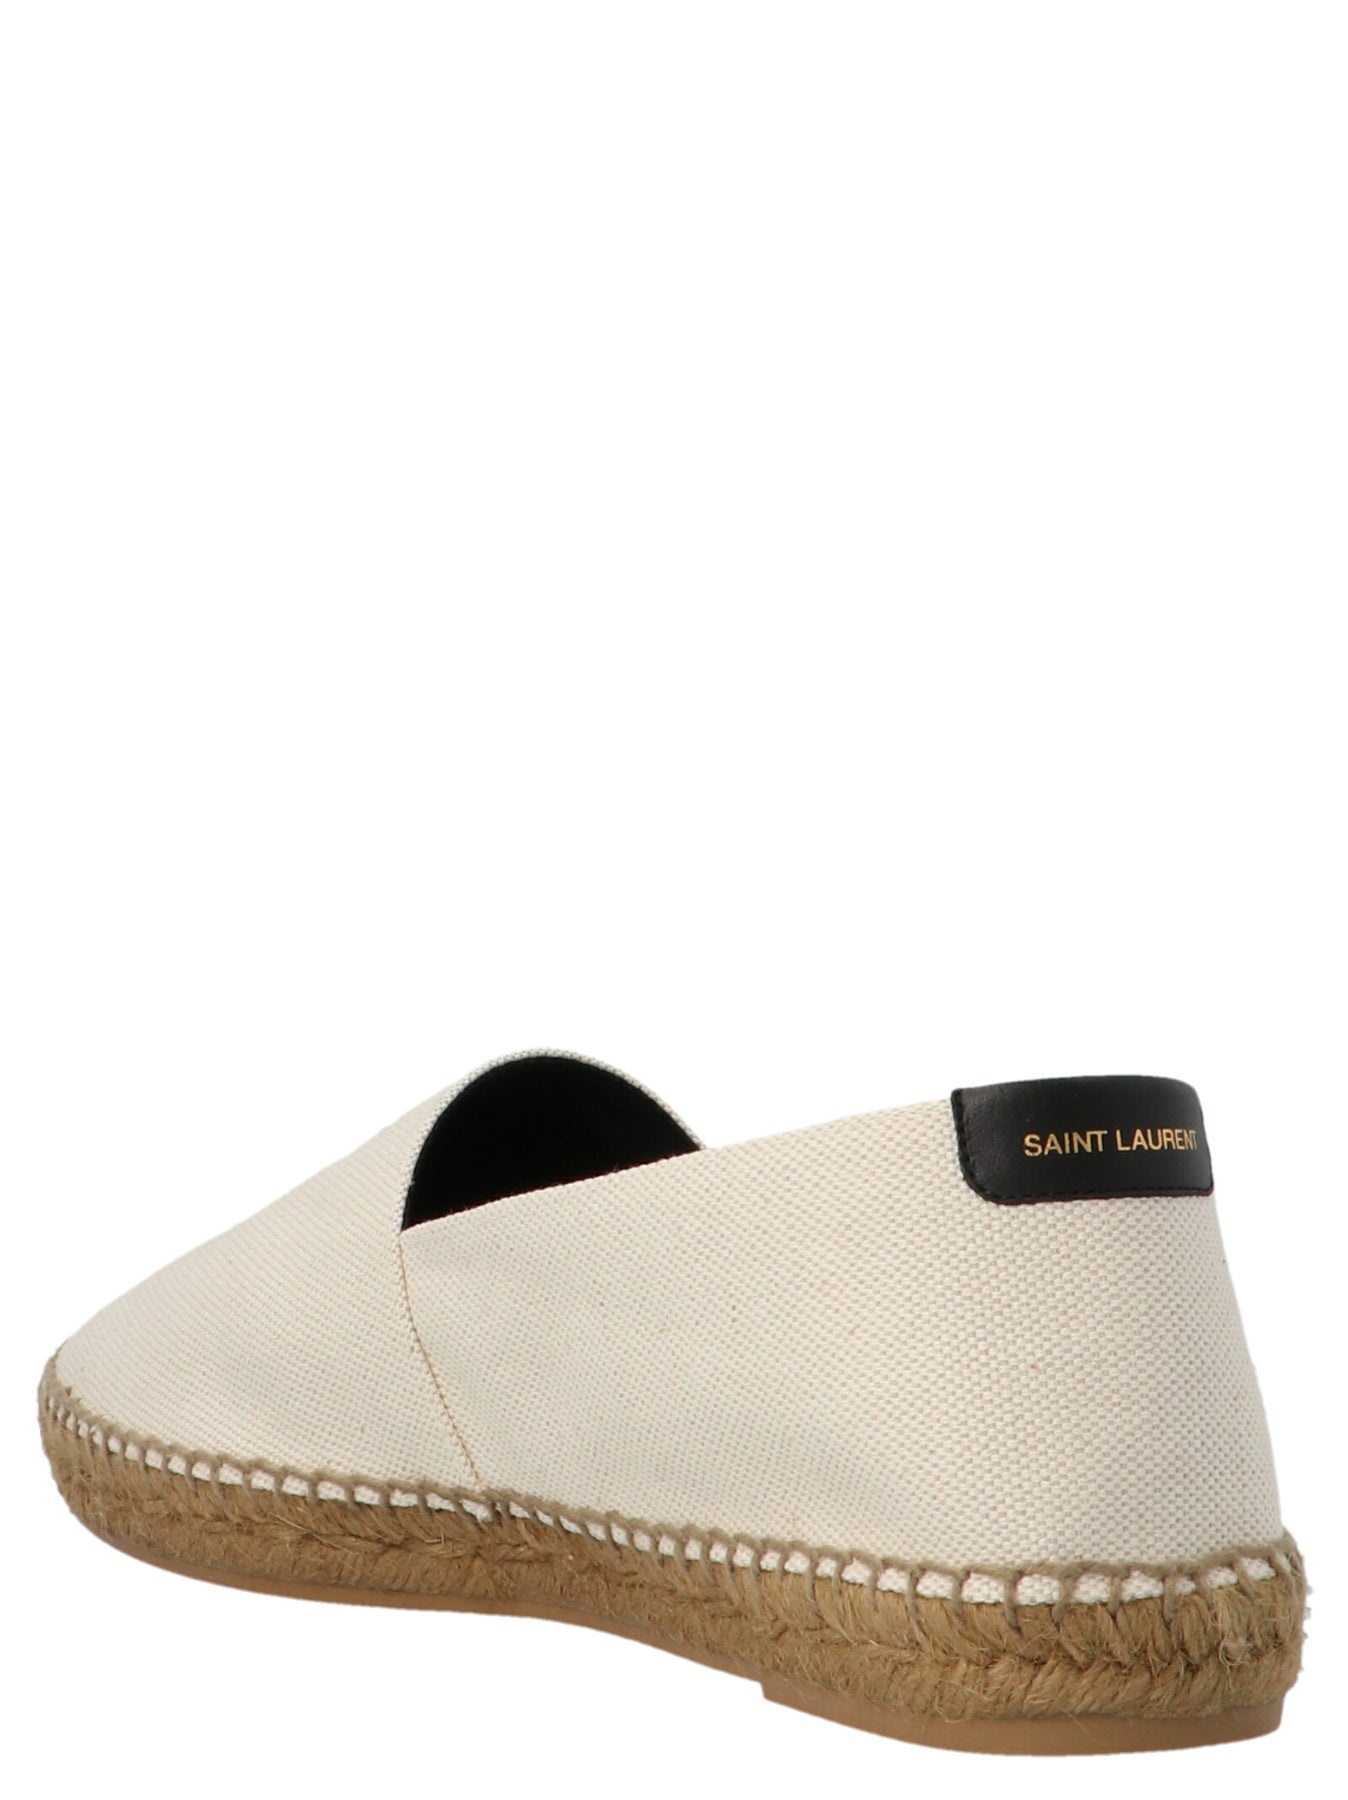 Logo Embroidery Espadrilles Flat Shoes Beige - 2